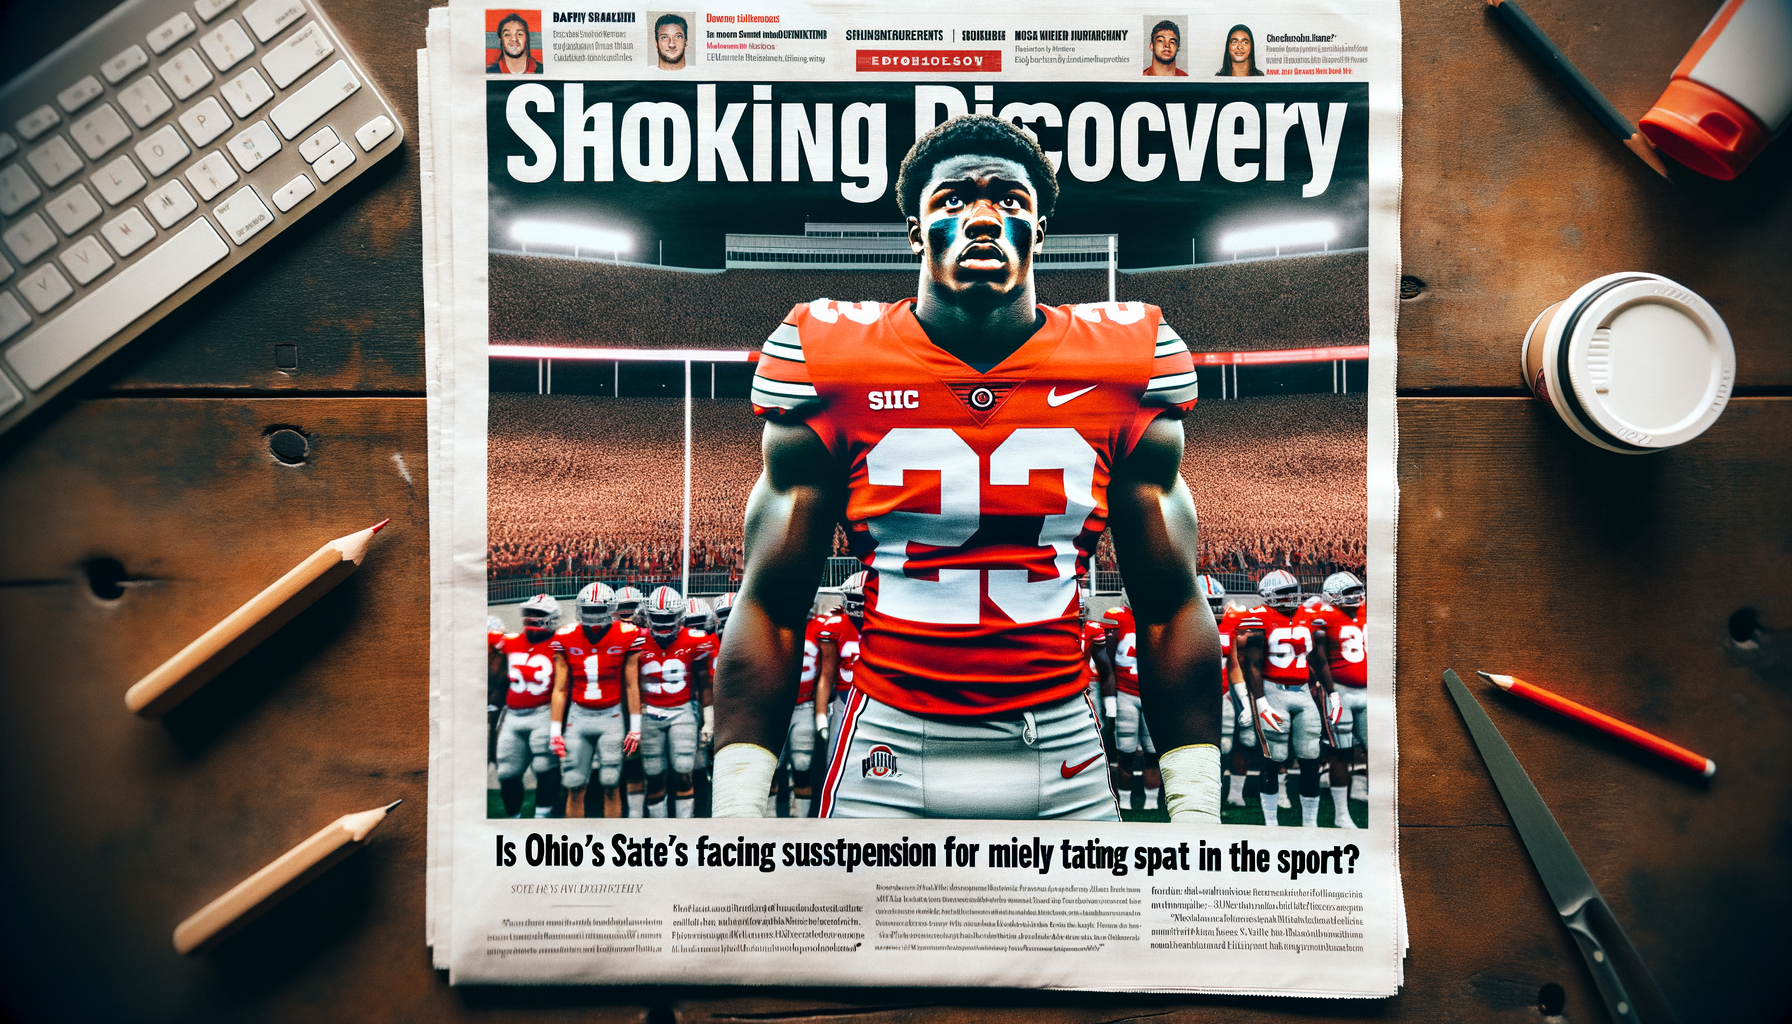 learn about the potential ongoing suspensions facing ohio state's top football prospect and the controversy surrounding his mere participation in the sport.